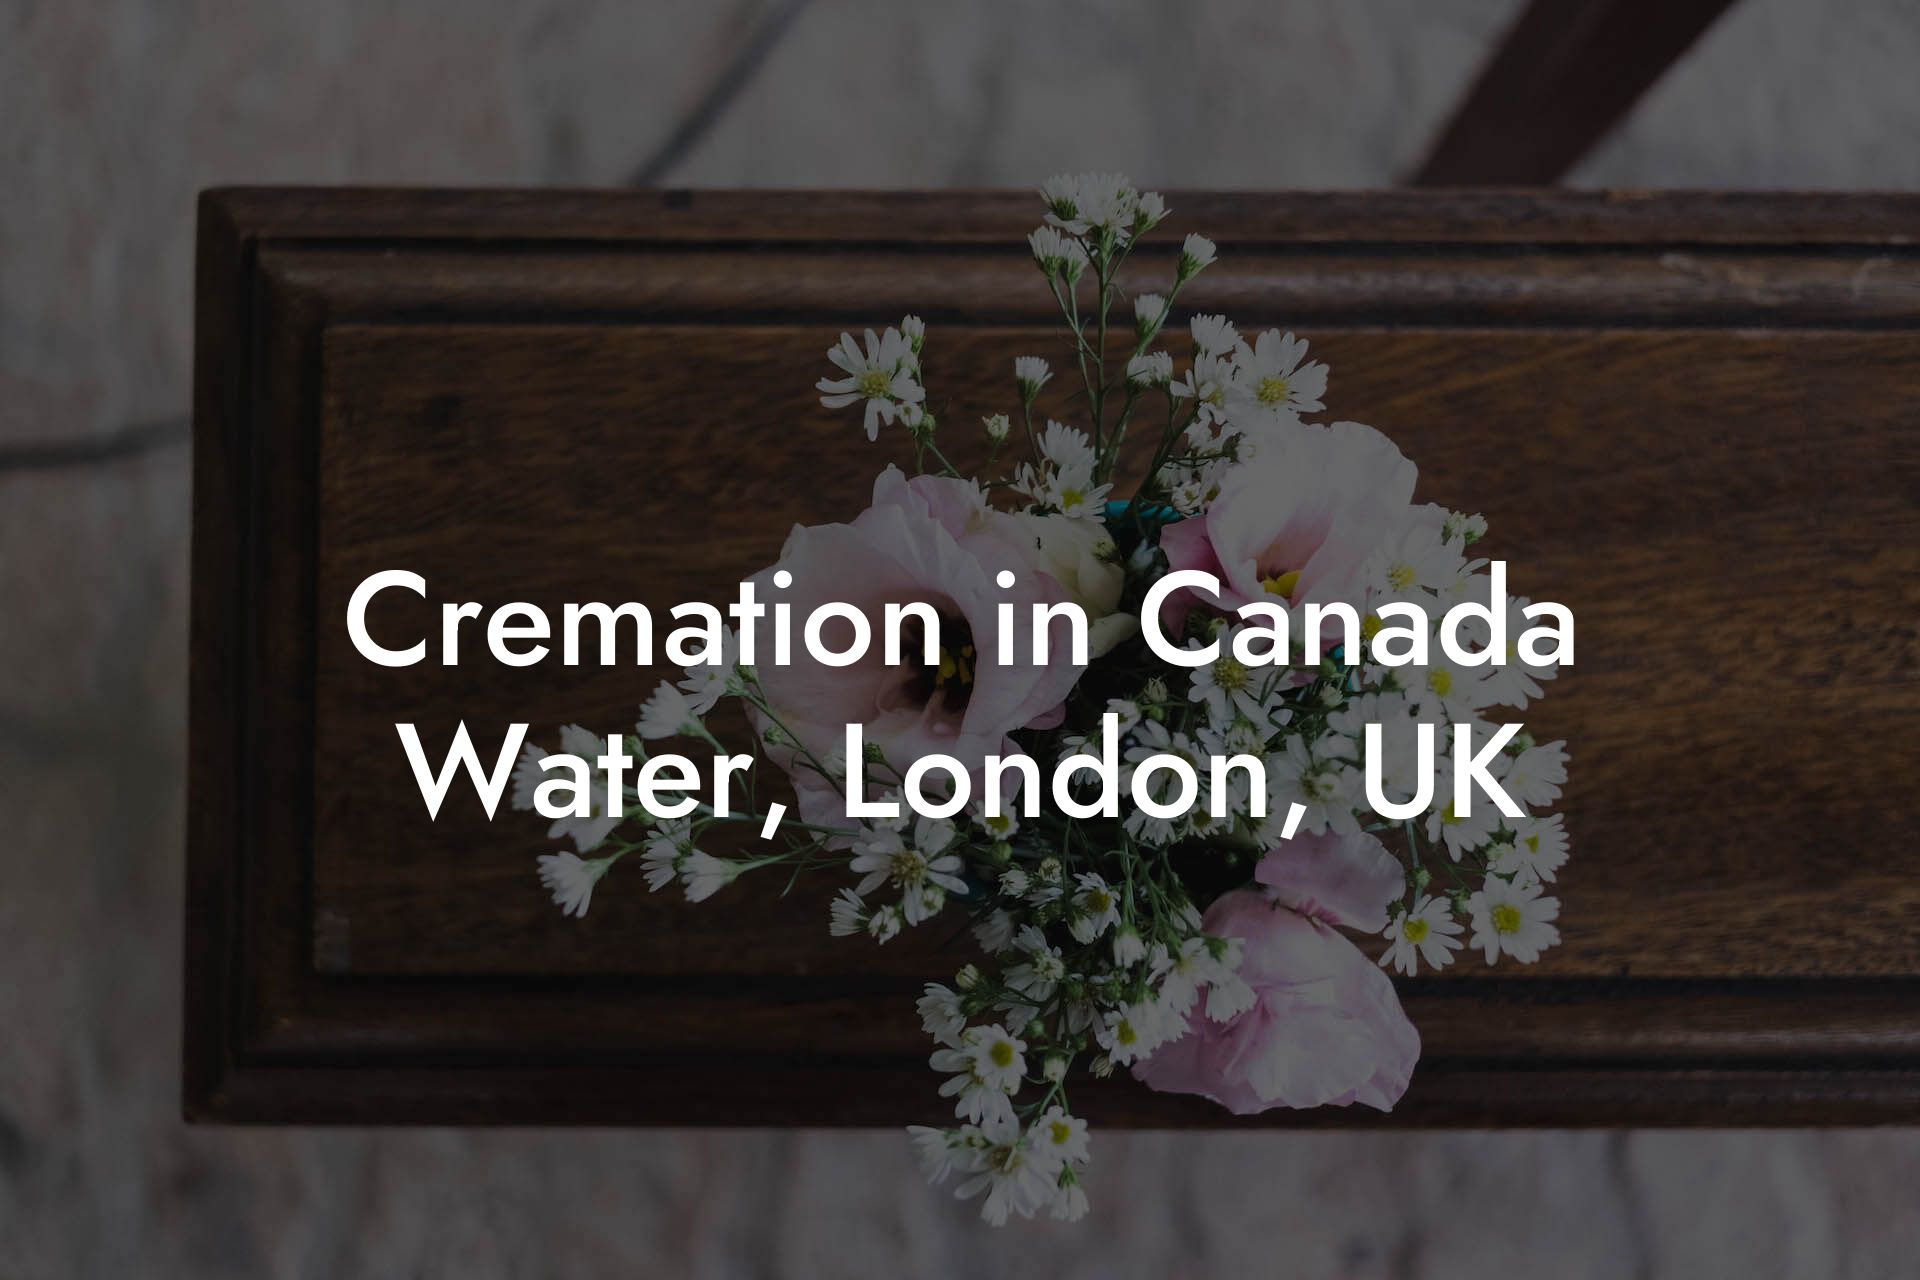 Cremation in Canada Water, London, UK